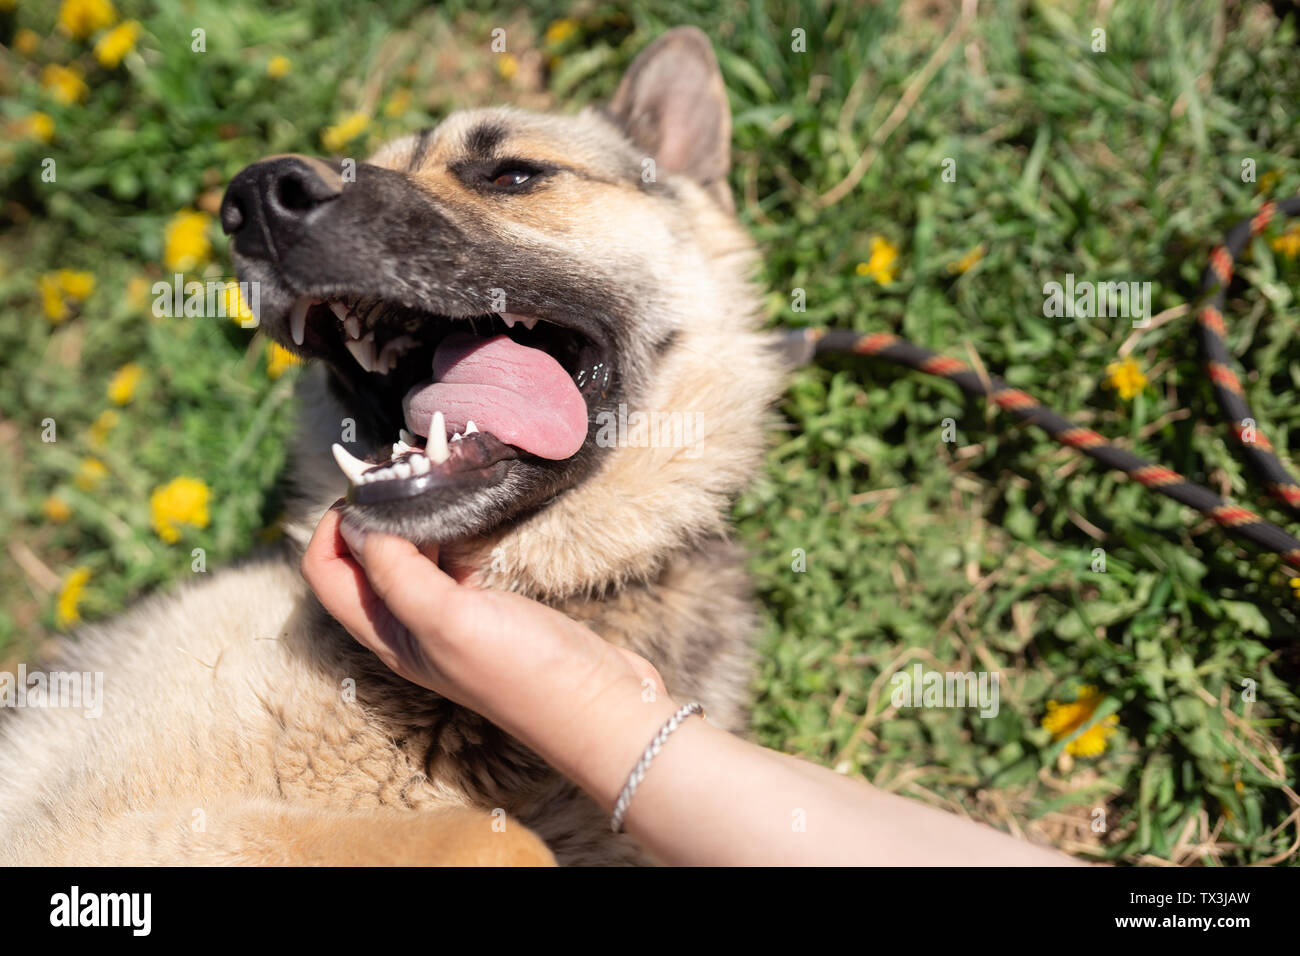 Image of dog with tongue sticking out lying on lawn with dandelions Stock Photo